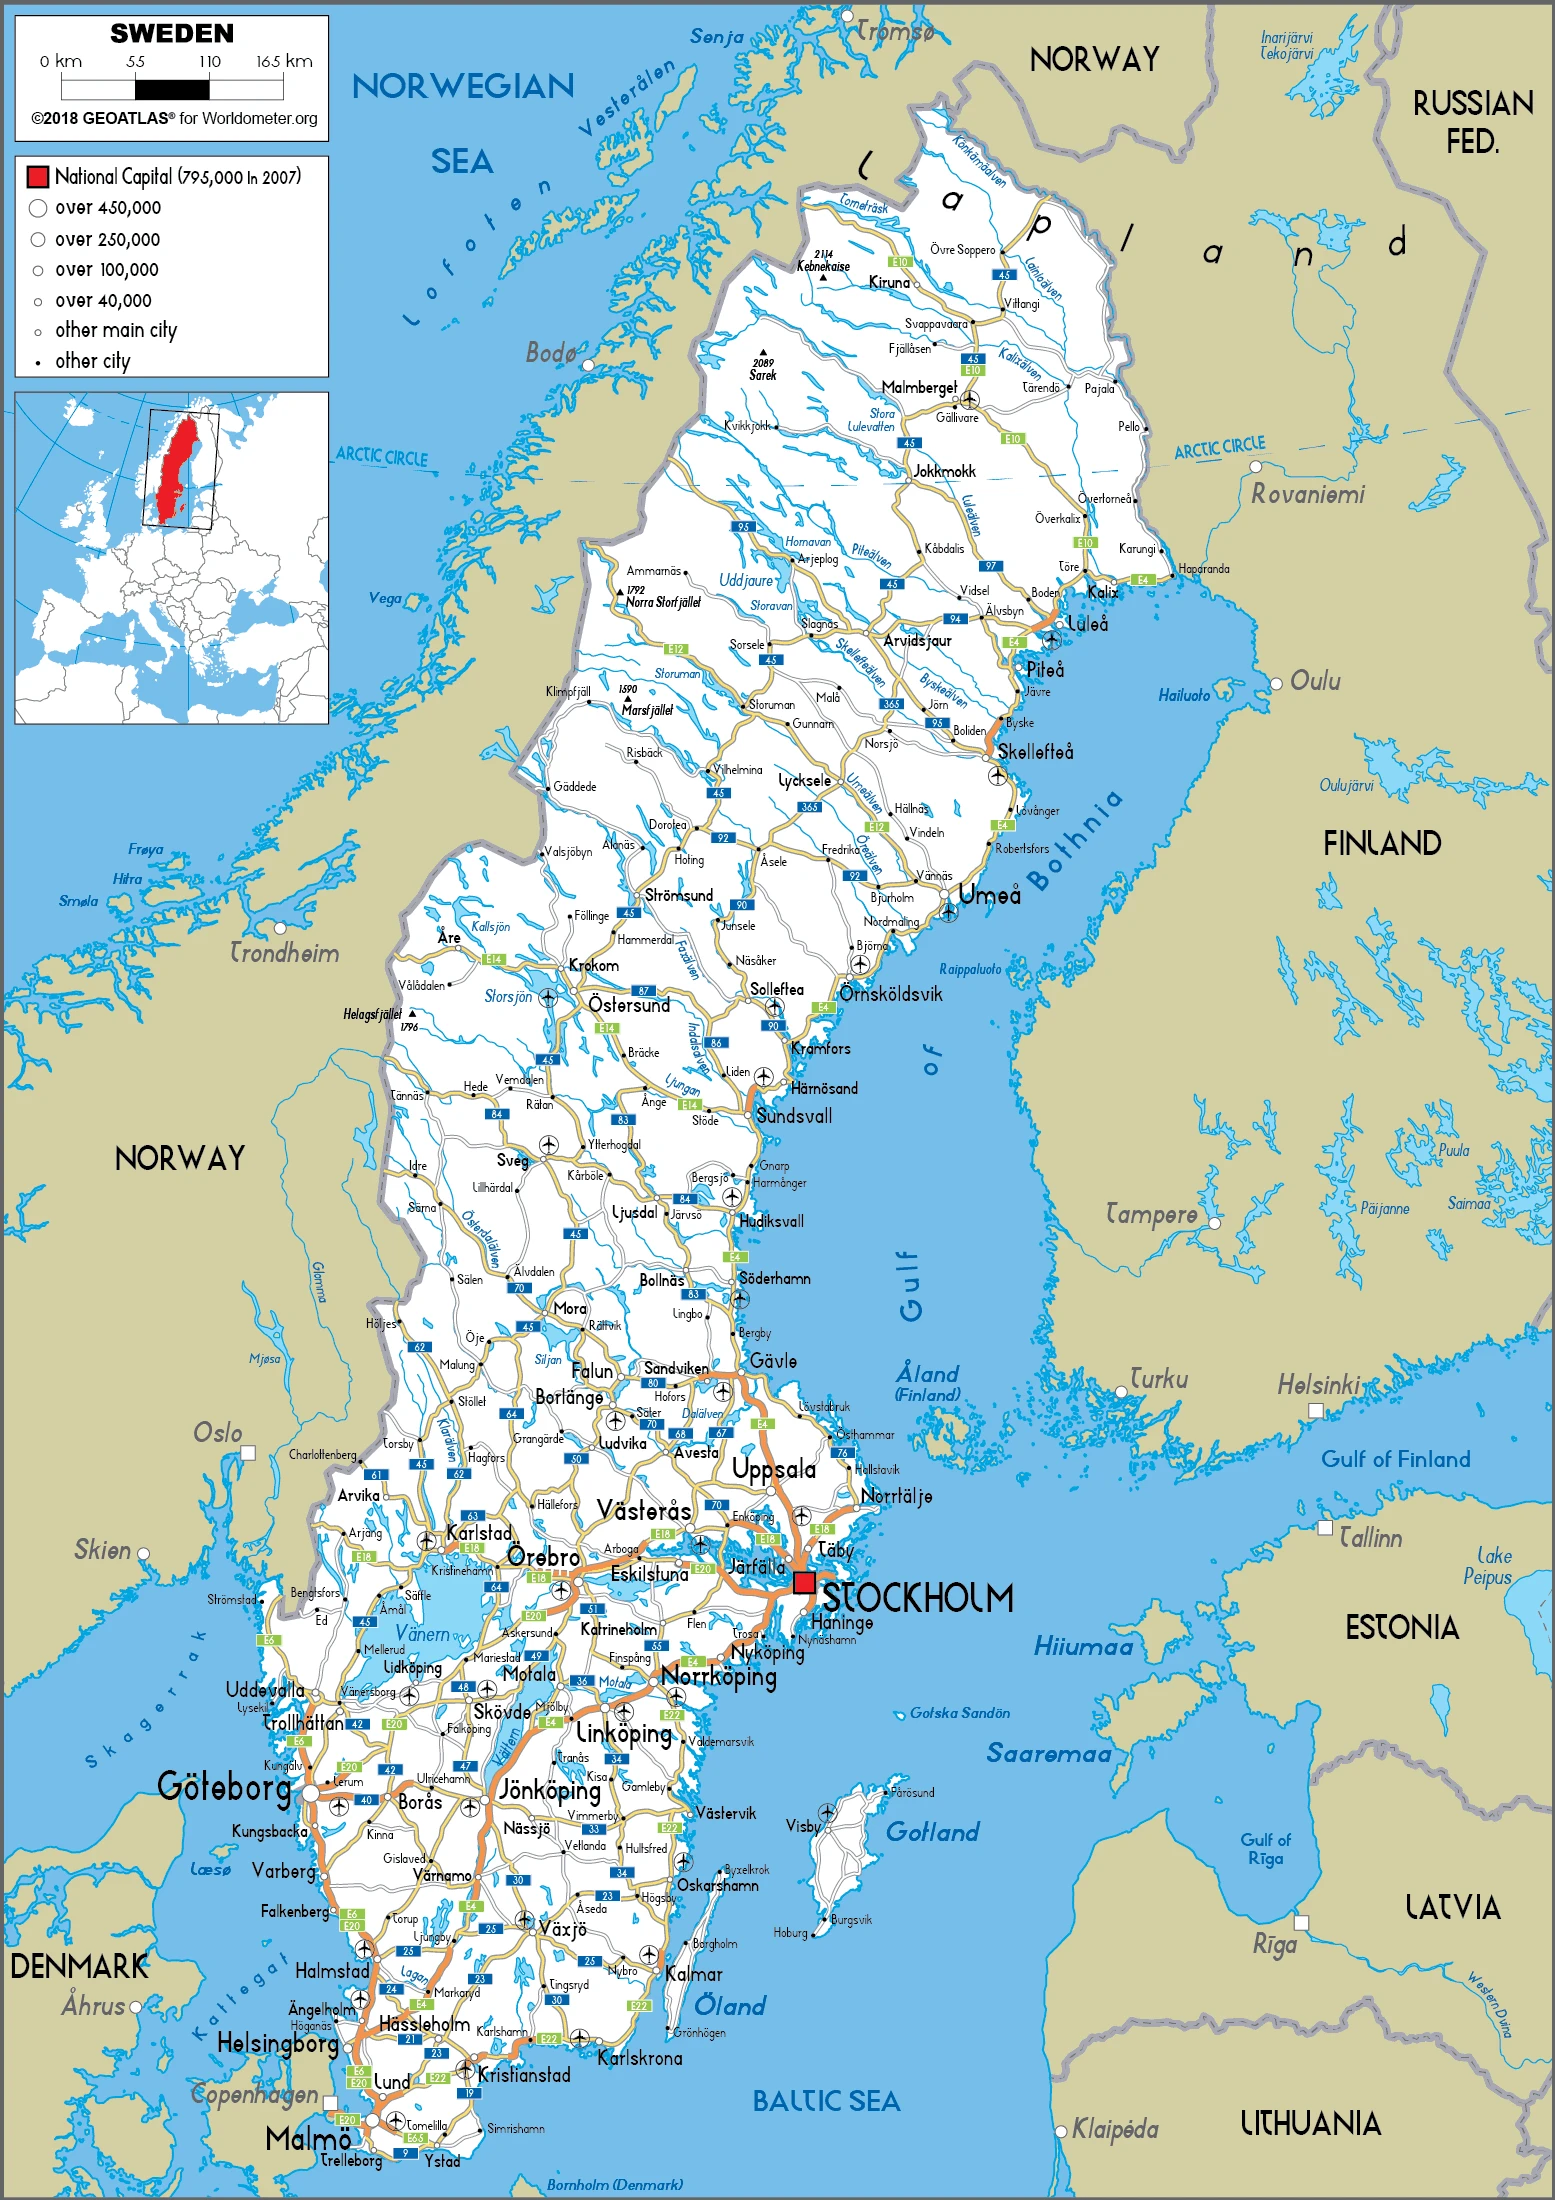 The route plan of the Swedish roadways.